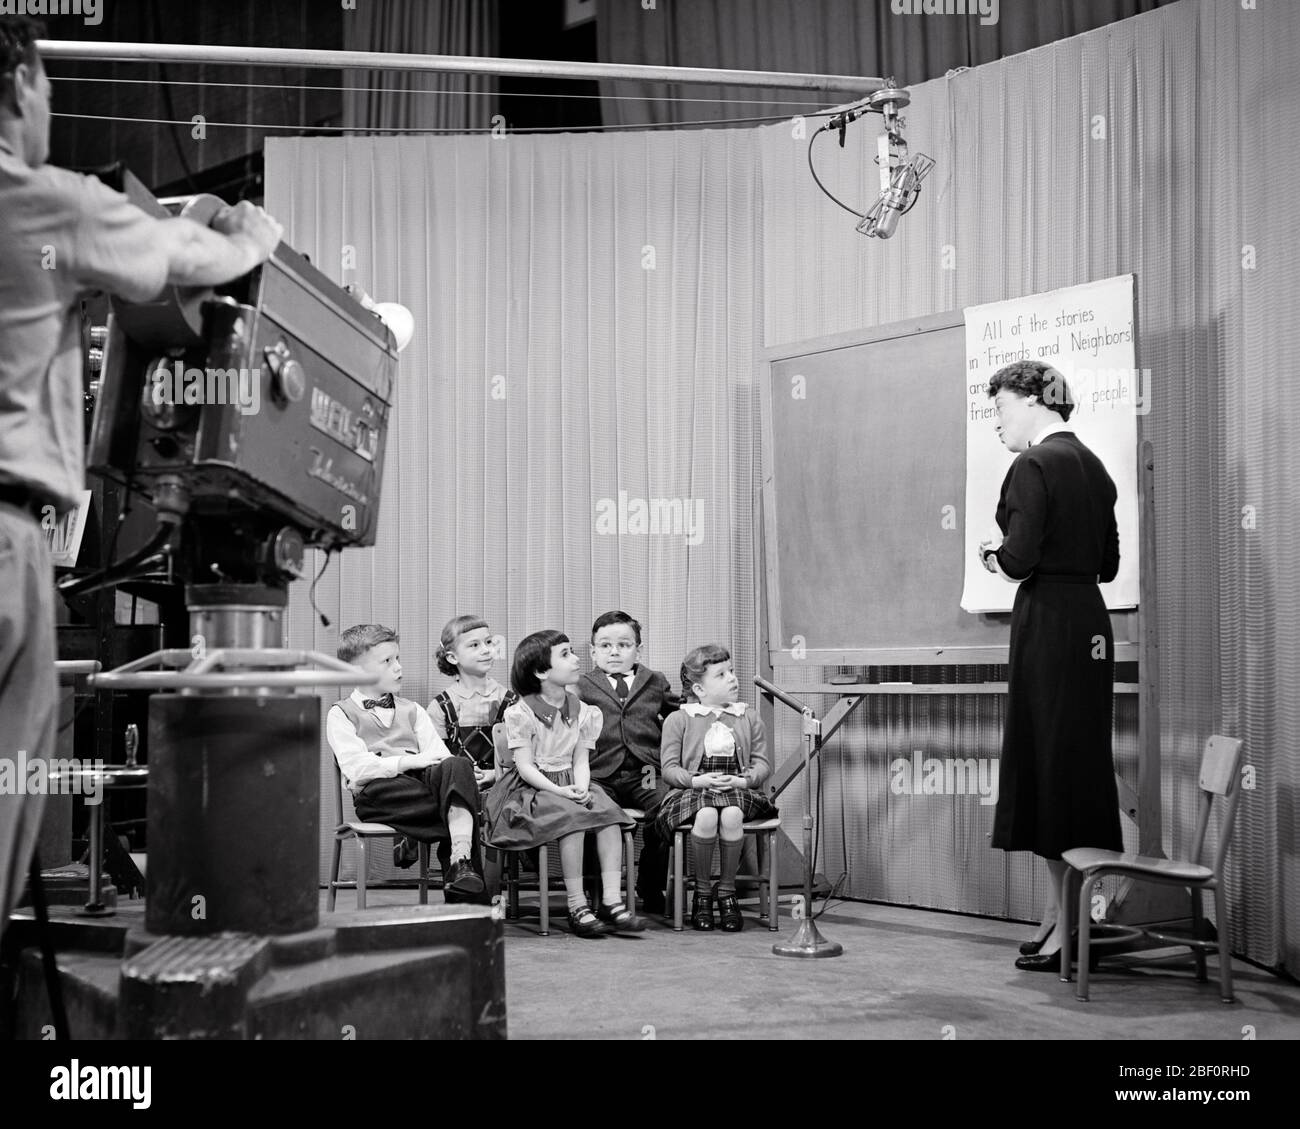 1950s MAN OPERATING TELEVISION CAMERA SHOWING WOMAN TEACHER INSTRUCTING READING CLASS FOR FIRST THROUGH THIRD GRADE STUDENTS - s3734 HAR001 HARS FIRST COMMUNITY URBAN OLD TIME NOSTALGIA MEDIA OLD FASHION 1 THROUGH JUVENILE COMMUNICATION TECHNOLOGY TEAMWORK LIFESTYLE FIVE FEMALES 5 JOBS SHOWING COPY SPACE FULL-LENGTH LADIES PERSONS CARING MALES ENTERTAINMENT B&W TELEVISIONS PERFORMING ARTS WIDE ANGLE SKILL GRADE OCCUPATION SKILLS OPERATING BROADCASTING DISCOVERY CUSTOMER SERVICE KNOWLEDGE PROGRESS EDUCATIONAL OPPORTUNITY AUTHORITY OCCUPATIONS THIRD INSTRUCTING HIGH TECH CONNECTION CONCEPTUAL Stock Photo